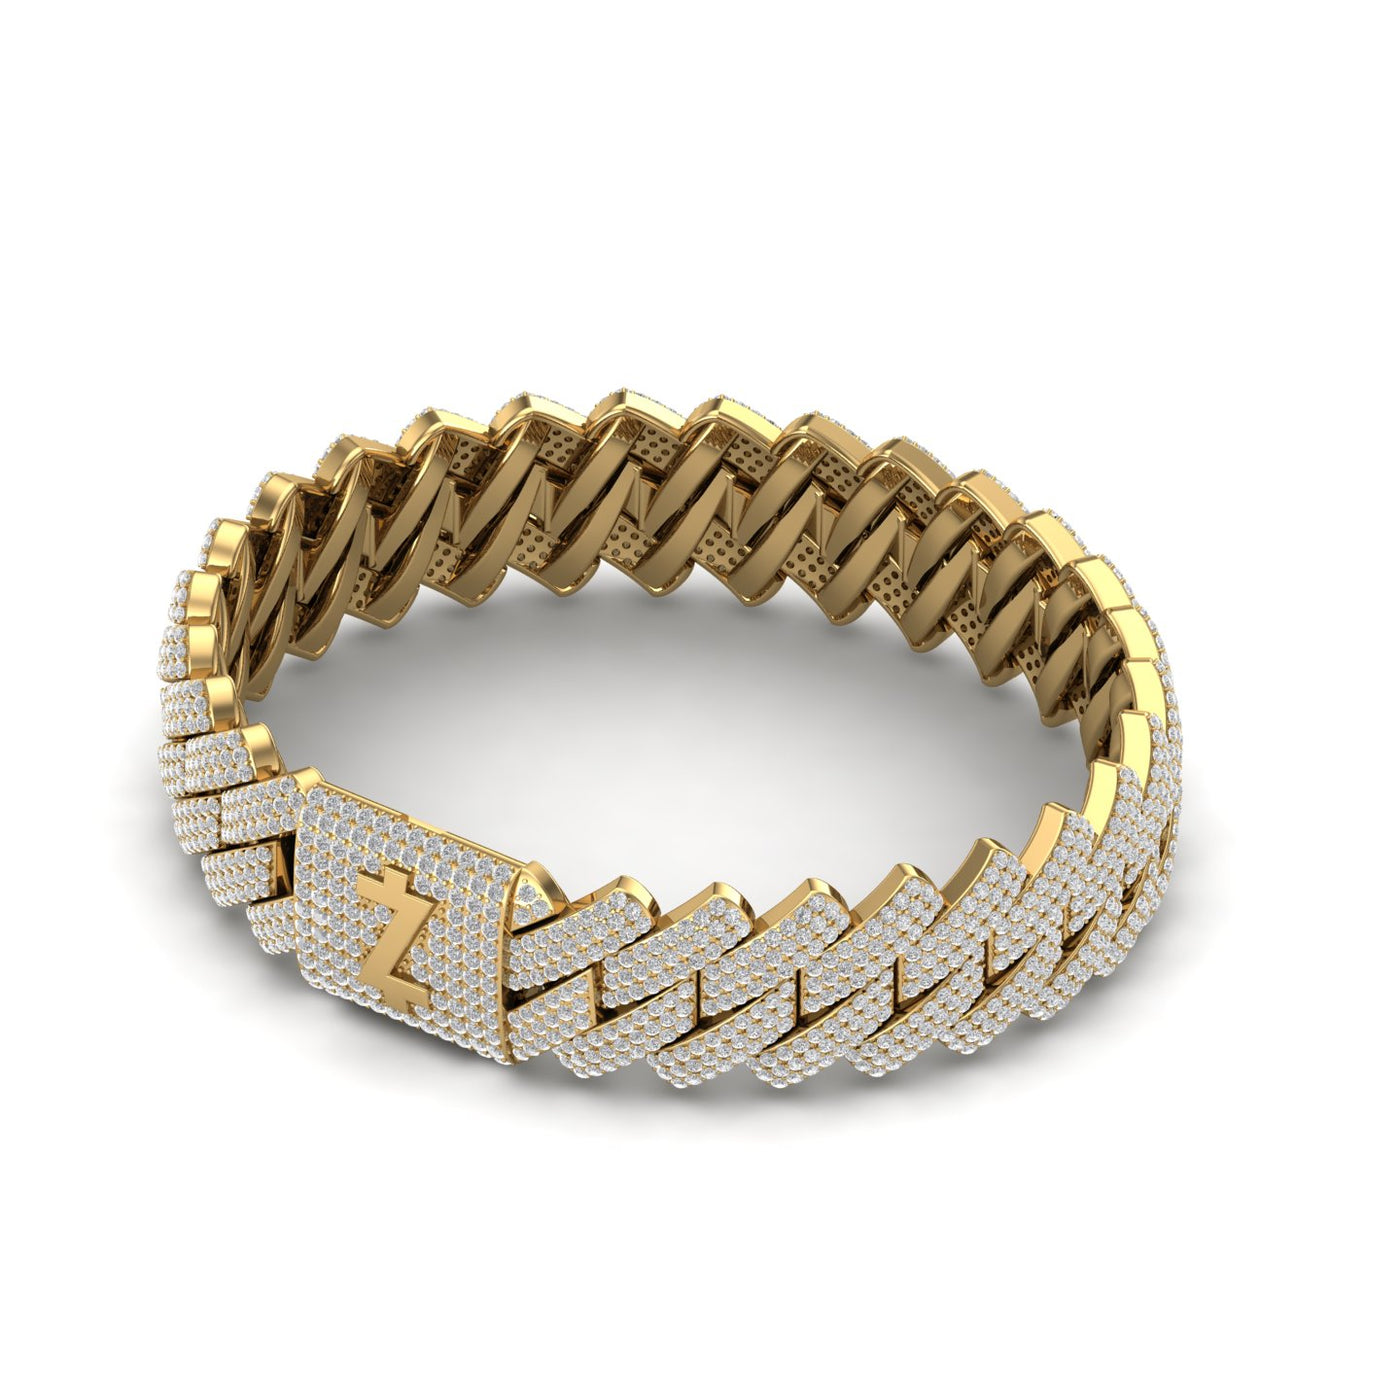 Gold Color Raised Cuban Bracelet Made of 925 Sterling Silver Material